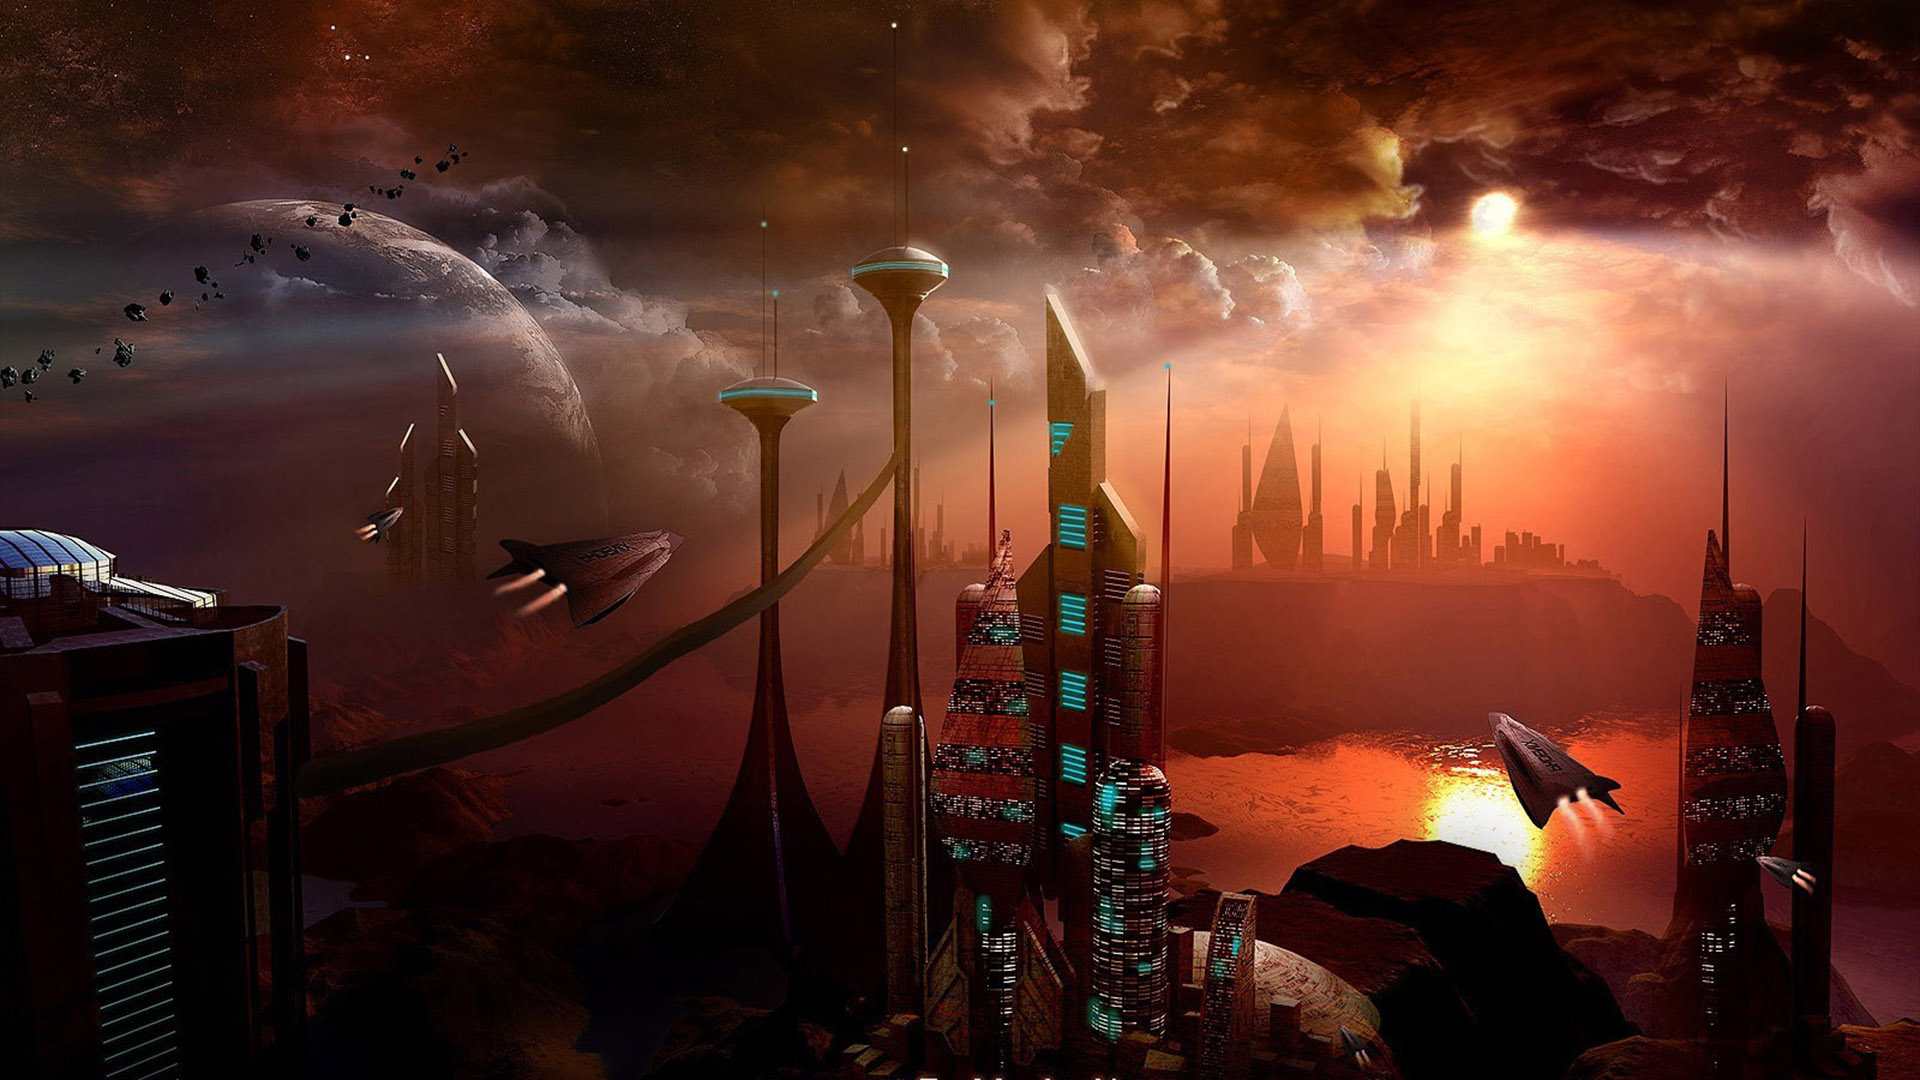 General 1920x1080 space space art science fiction digital art fantasy art painting city cityscape futuristic building tower Sun planet clouds meteors spaceship flying sunlight futuristic city artwork